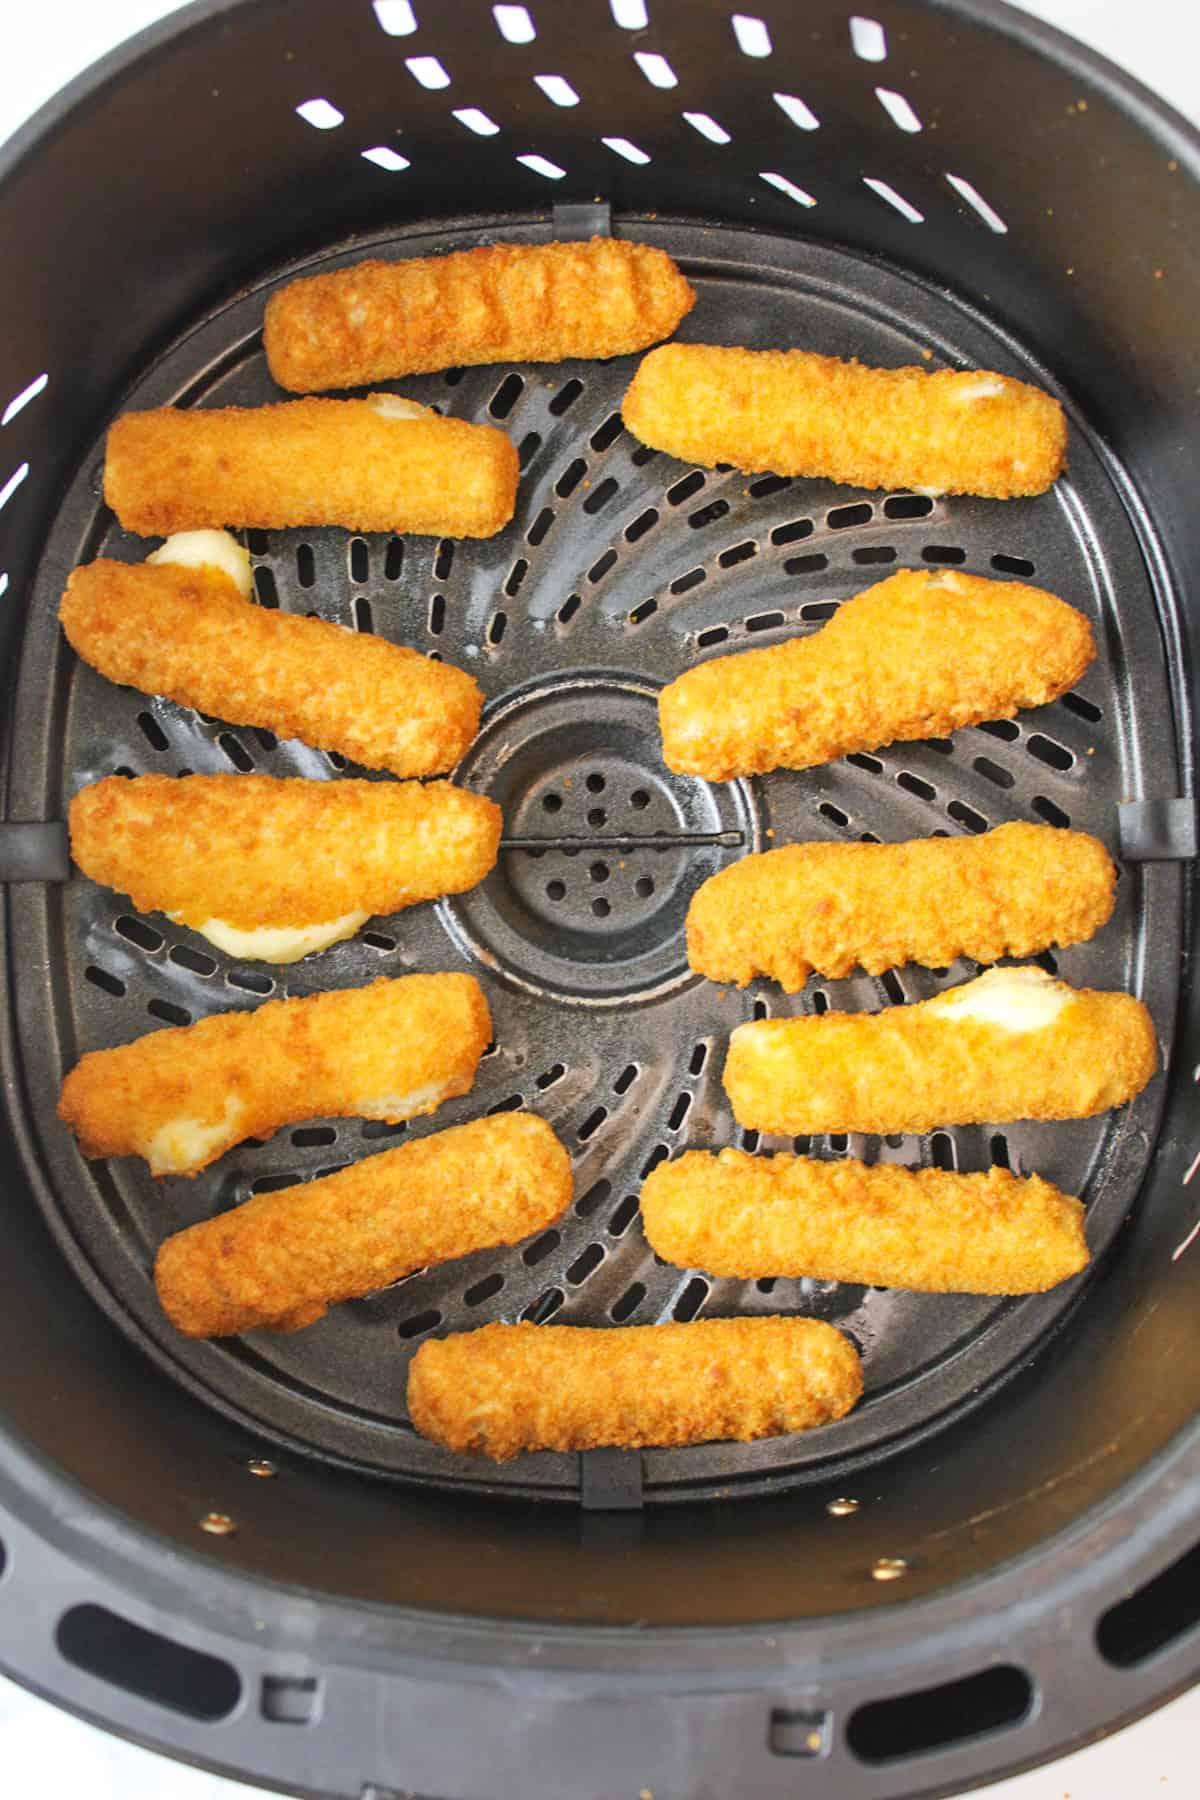 cooked mozarella sticks in an air fryer basket, some having cheese pop out